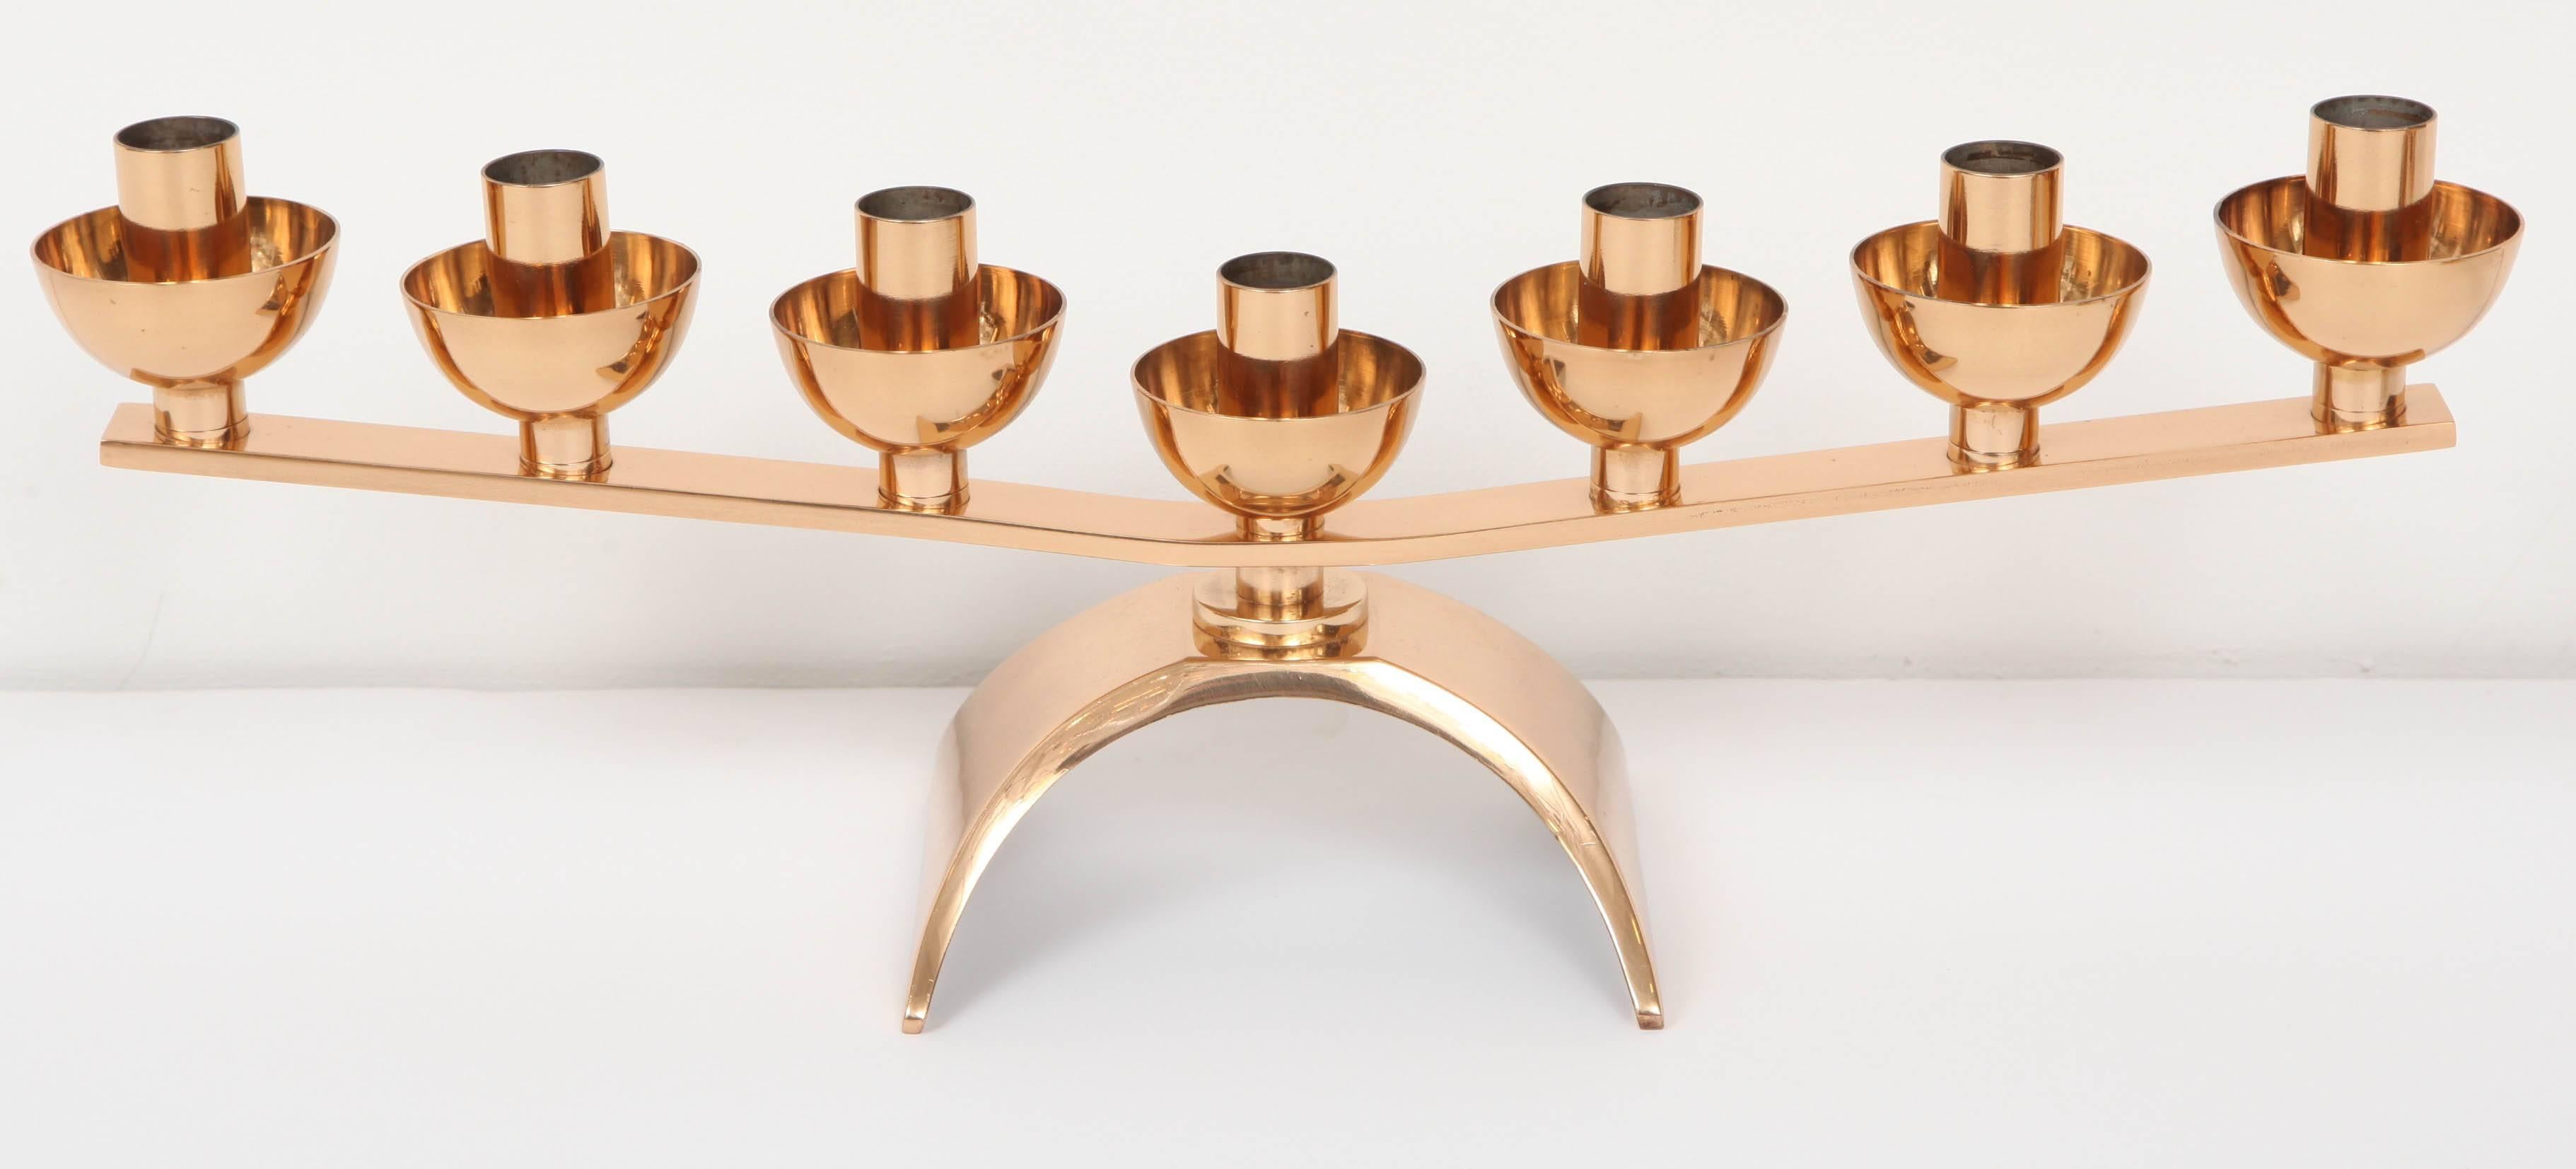 20th Century Pair of Brass Mid-Century Modern Candleholders, circa 1960 For Sale